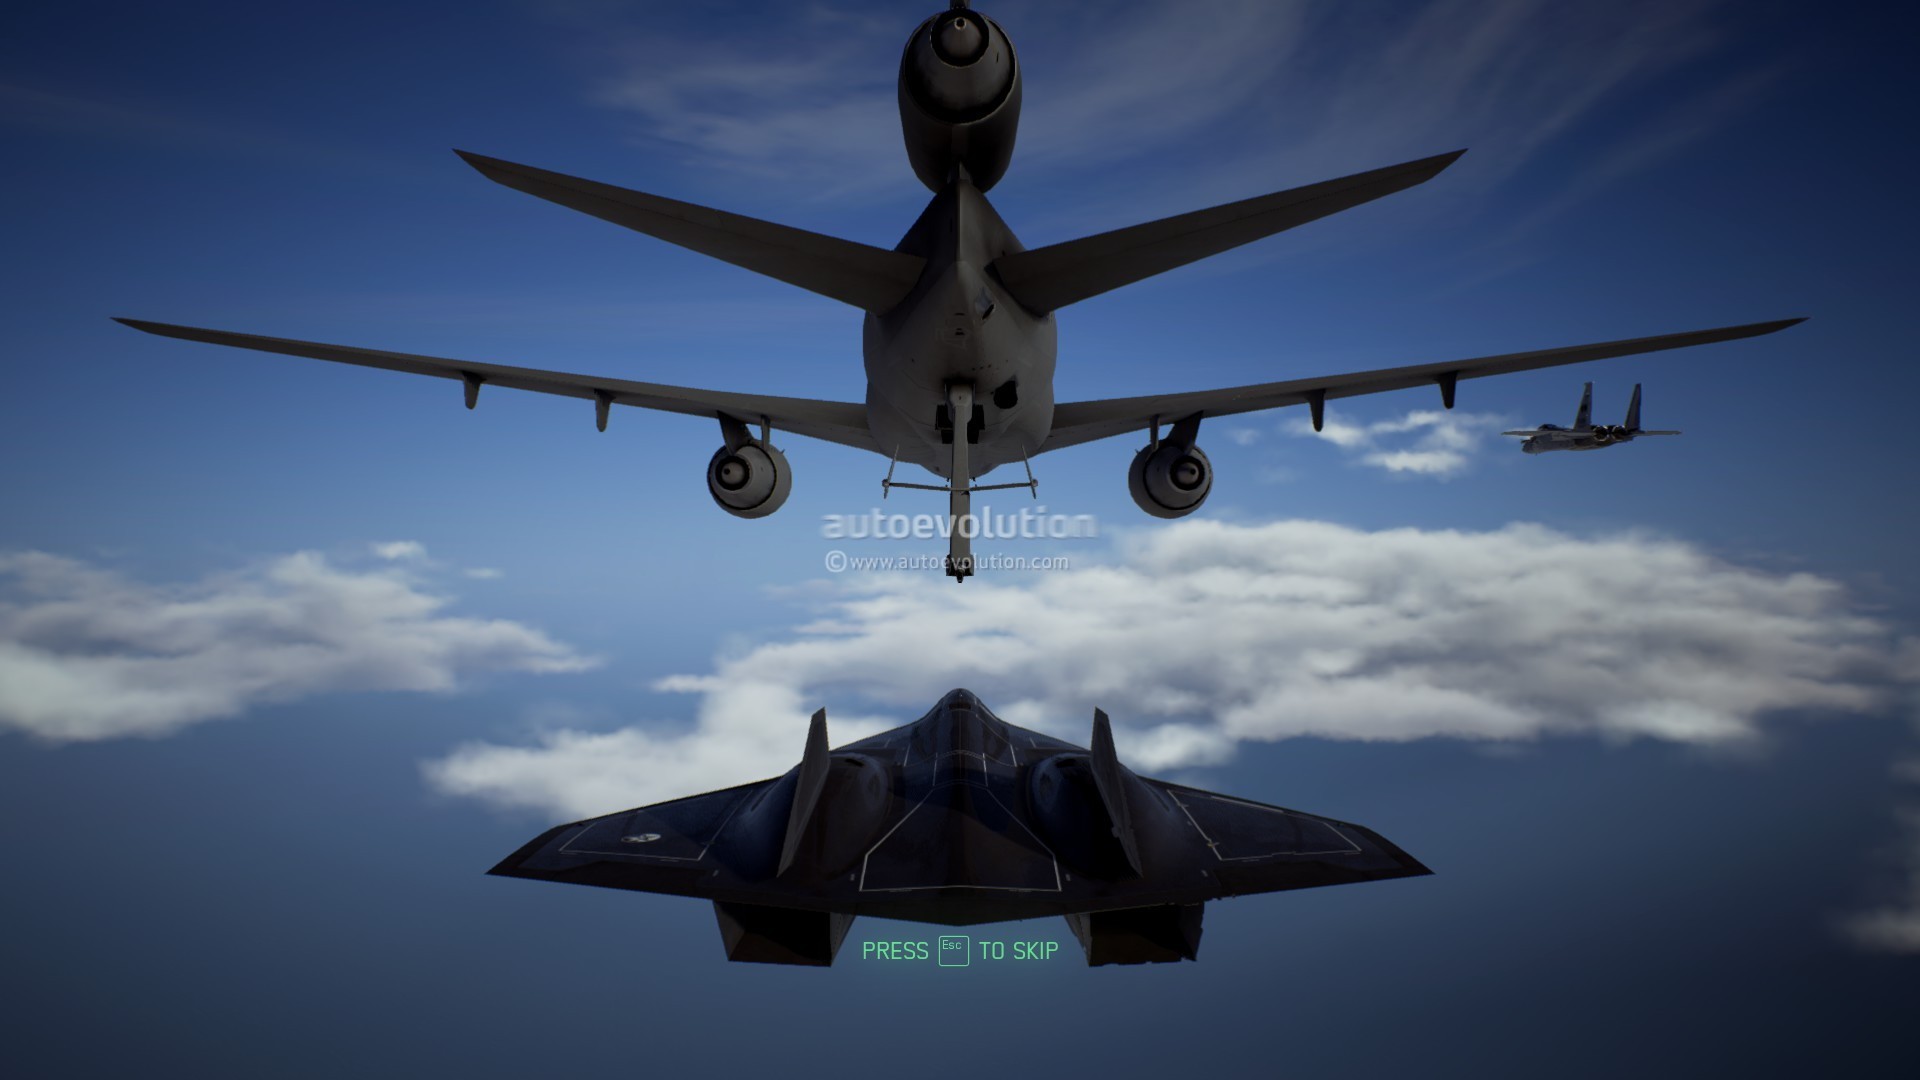 Review : Ace Combat 7: Skies Unknown is a joy to play and with